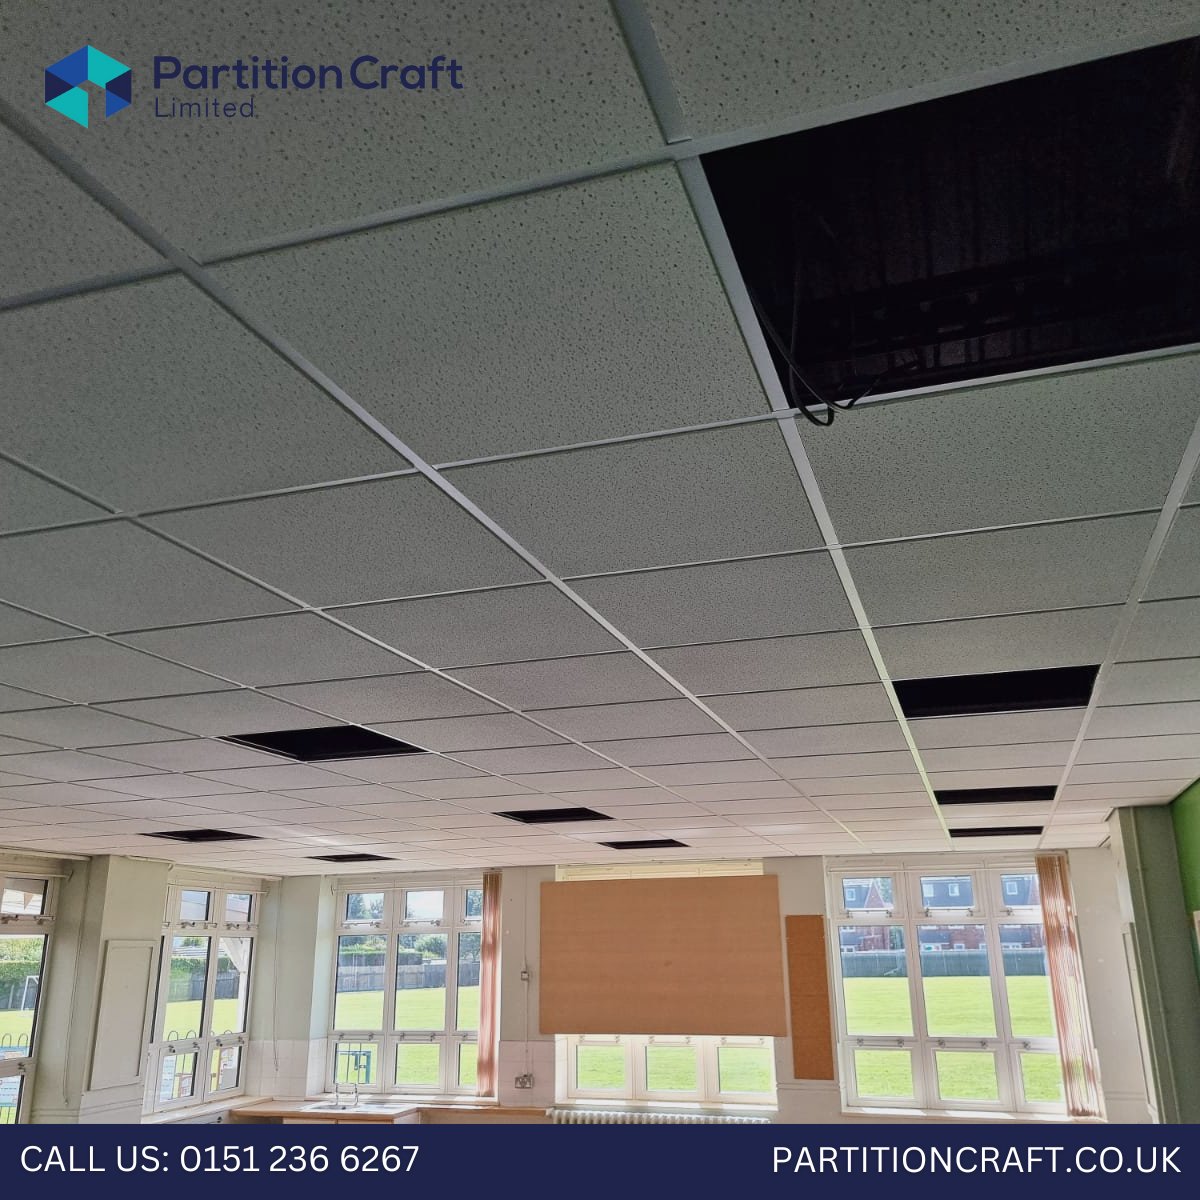 Our team has specialist knowledge on all types of suspended ceilings, from Suspended Grid to MF Fire Protection and Acoustic.

We supply and install a variety of suspended ceiling systems which are both functional and aesthetic.

#suspendedceilings #ceilings